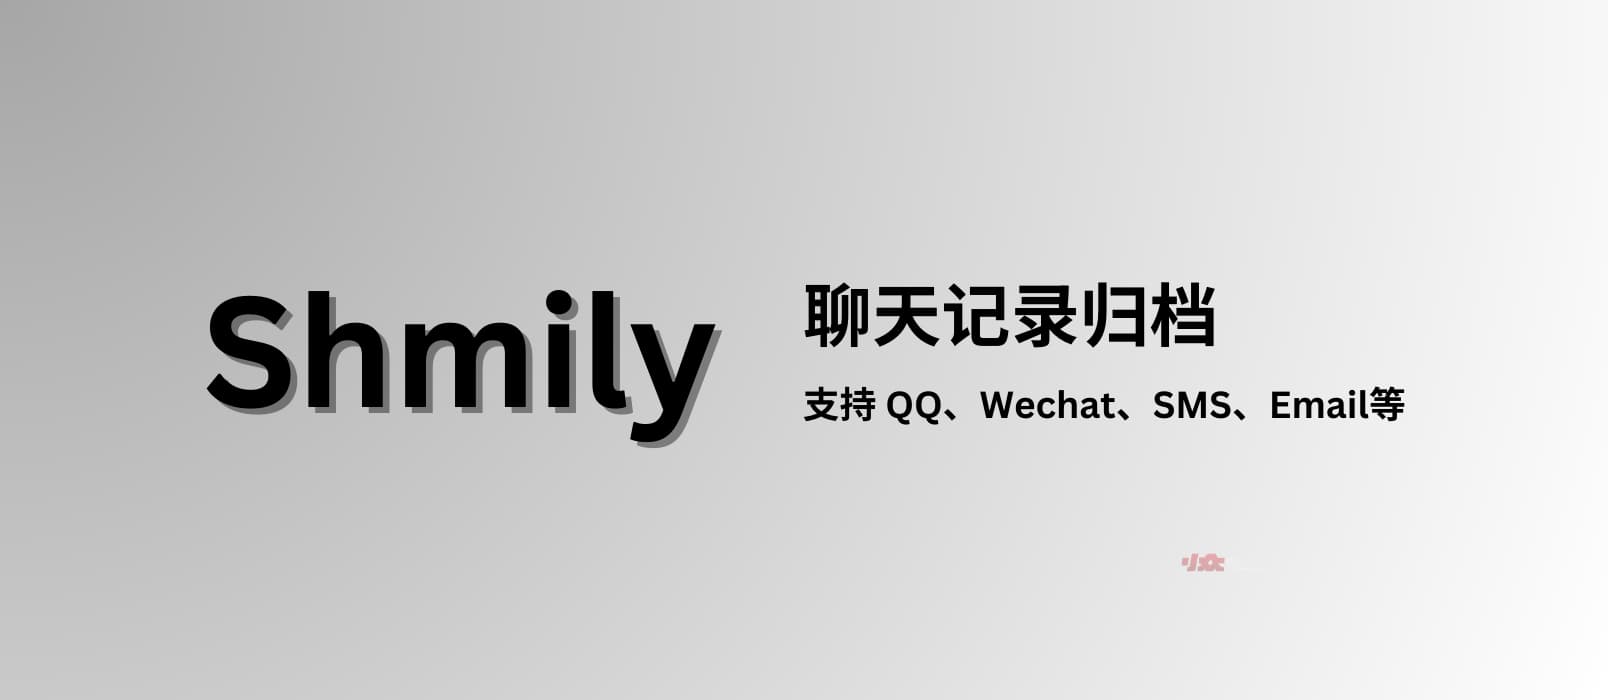 Shmily - 聊天记录归档，支持 QQ、WeChat、SMS、Email 等